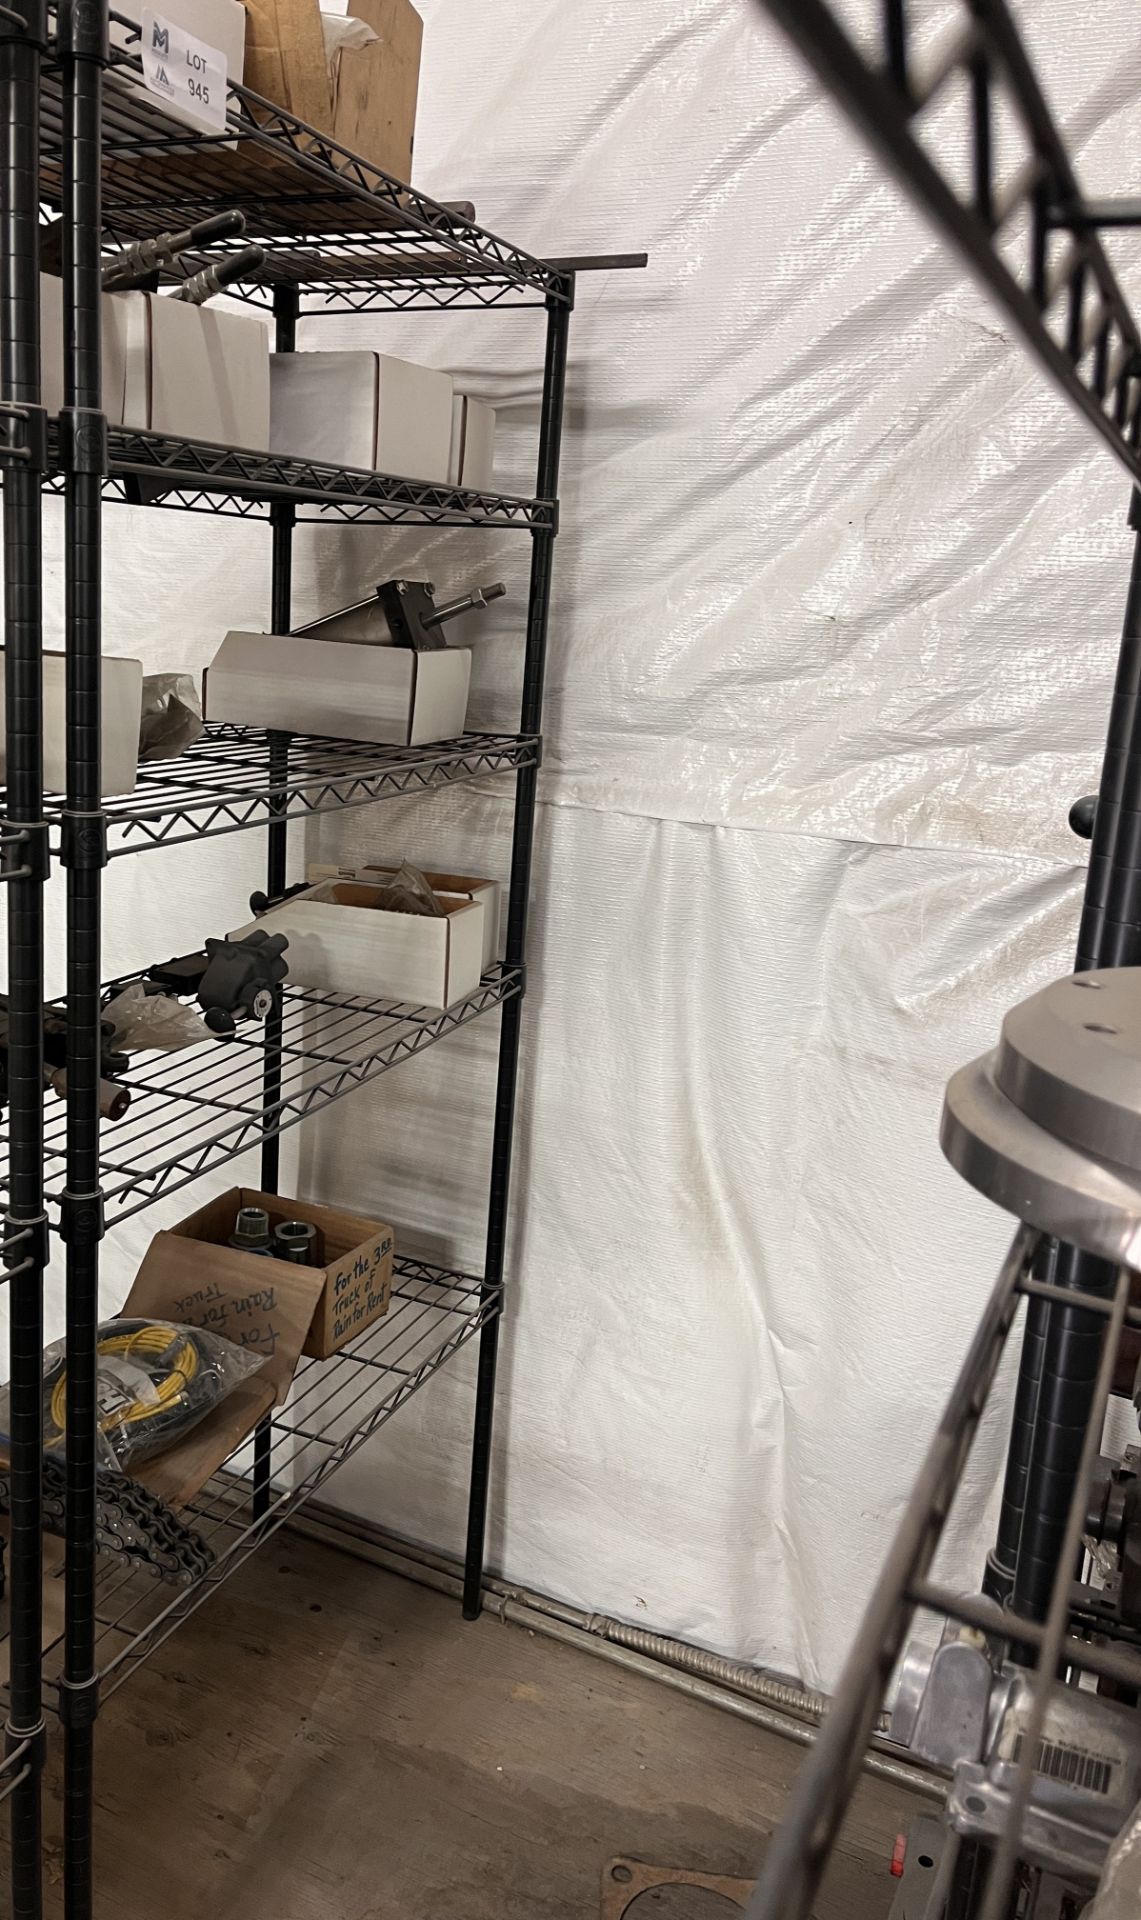 Bakers Rack, Air Cylinder Parts, Etc